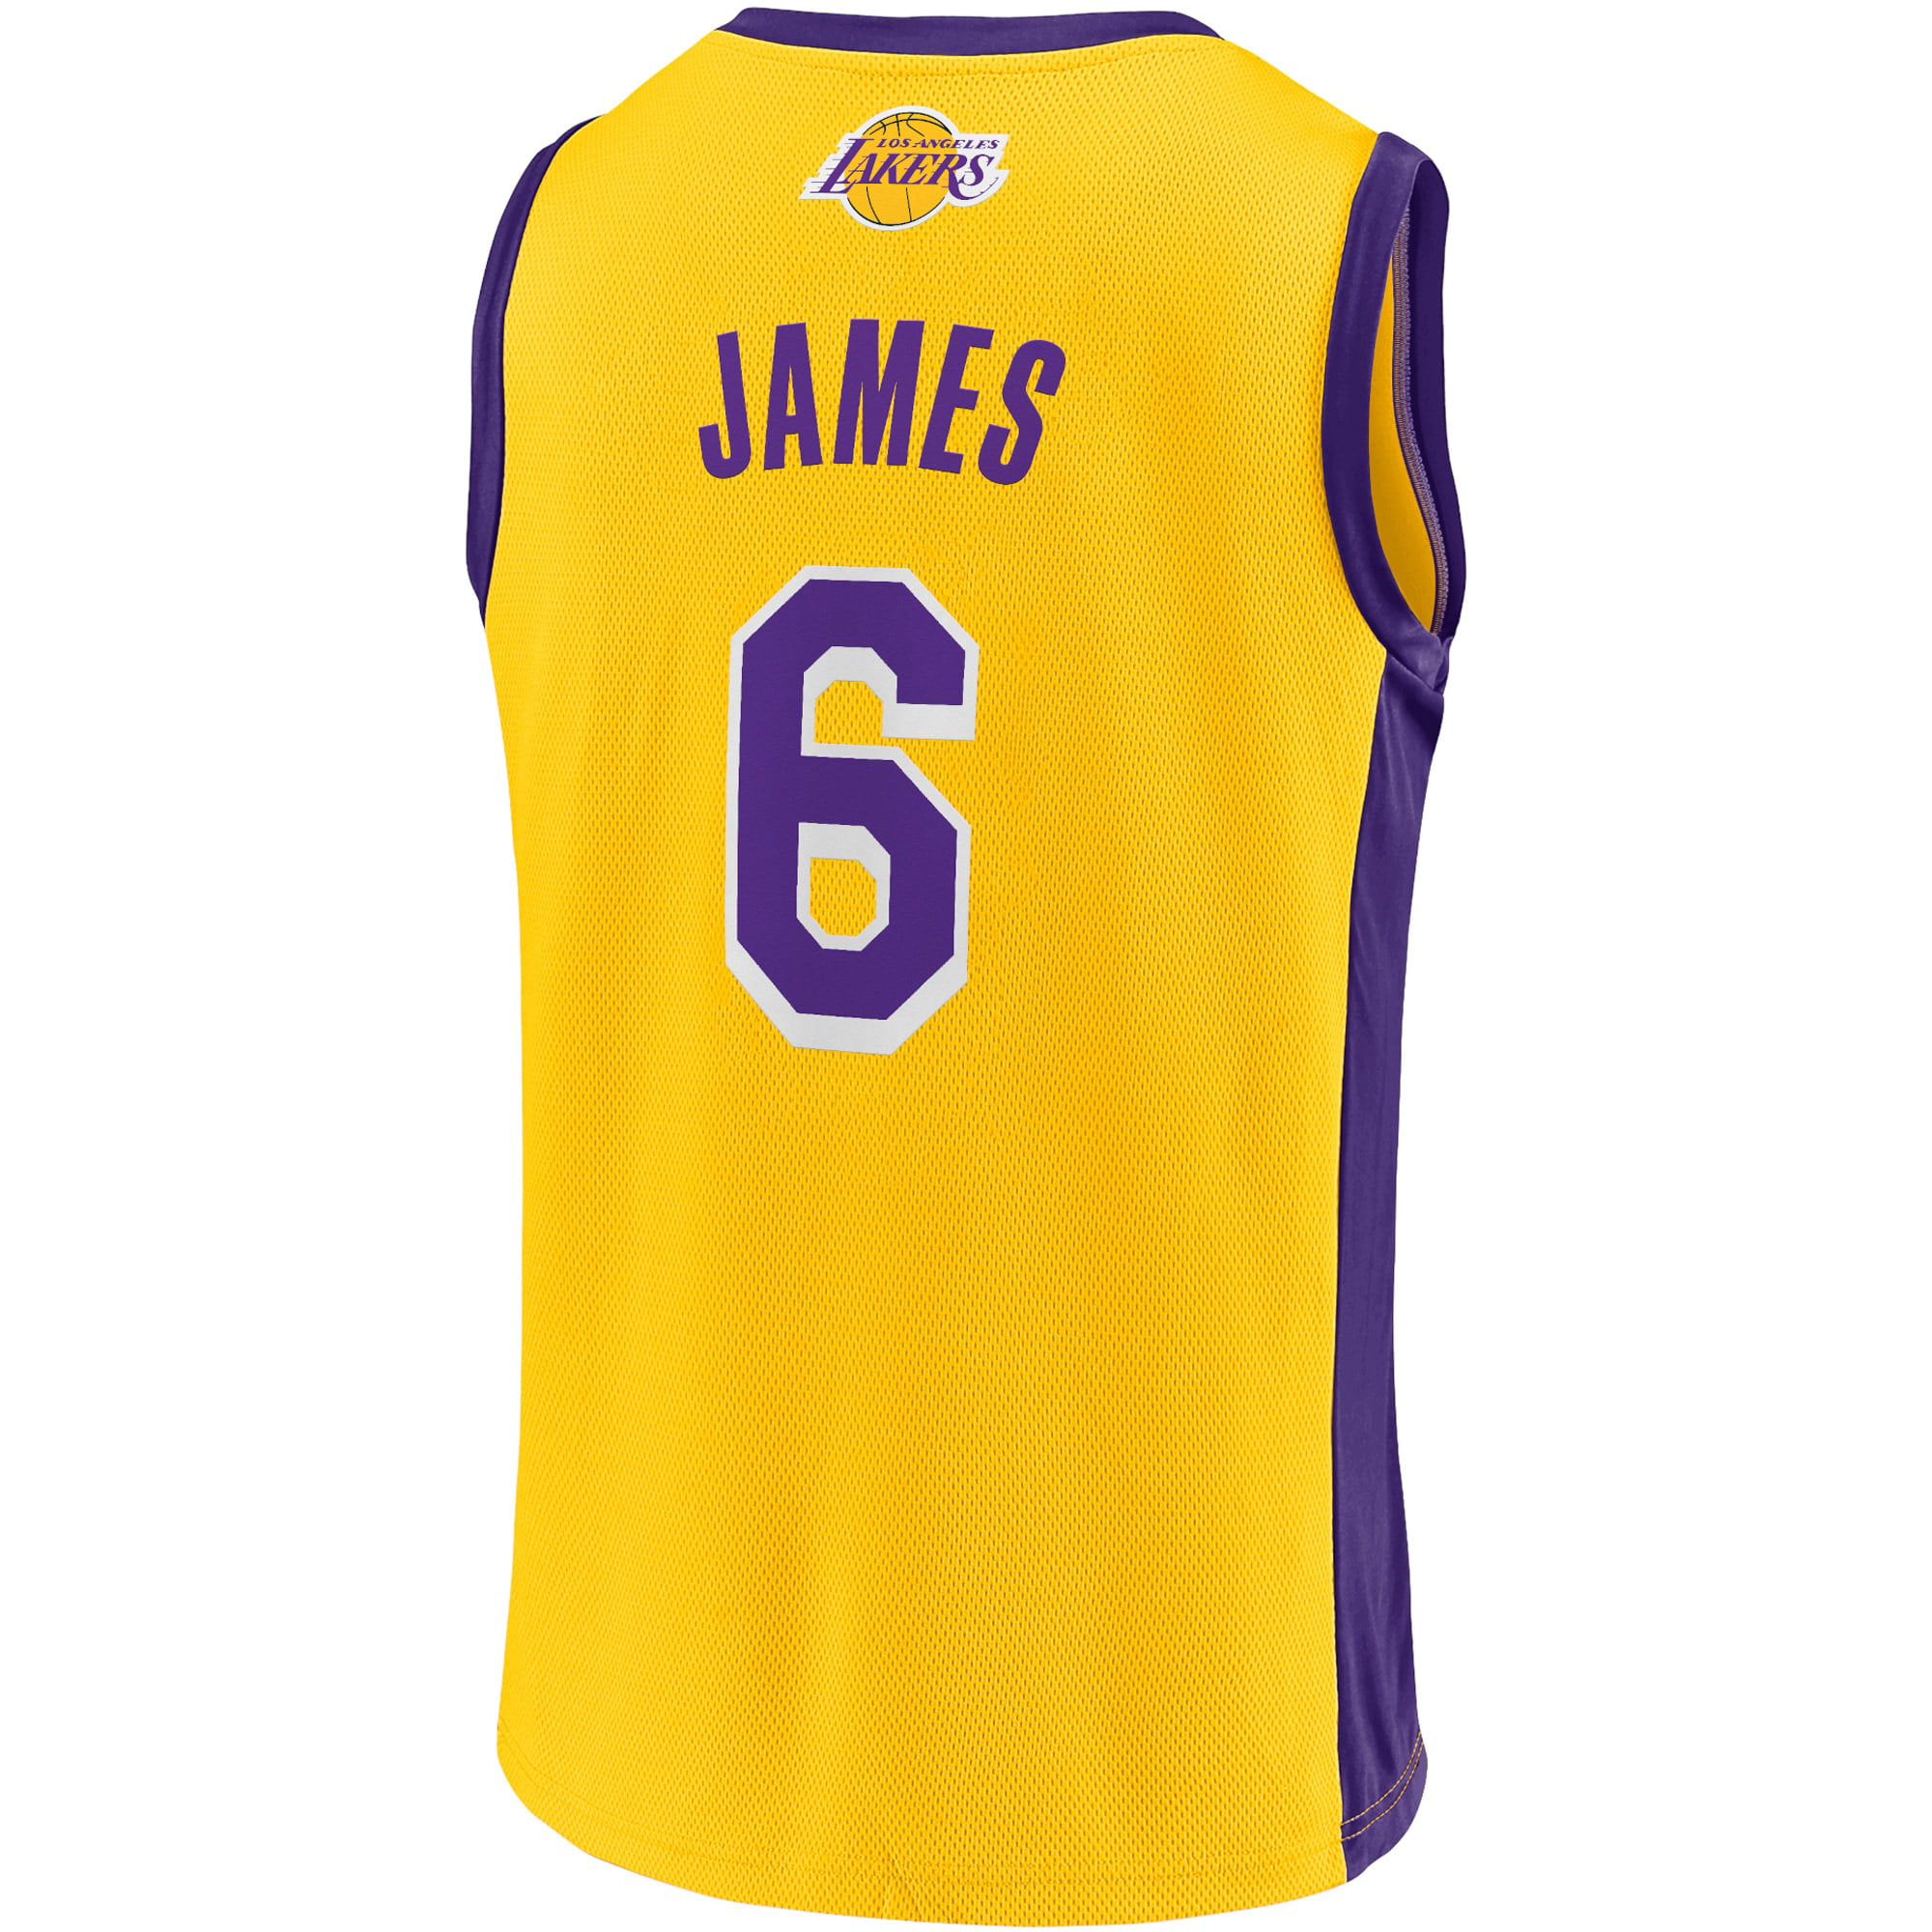 REVIEW: NIKE AUTHENTIC JERSEY REVIEW (LeBron James Los Angeles